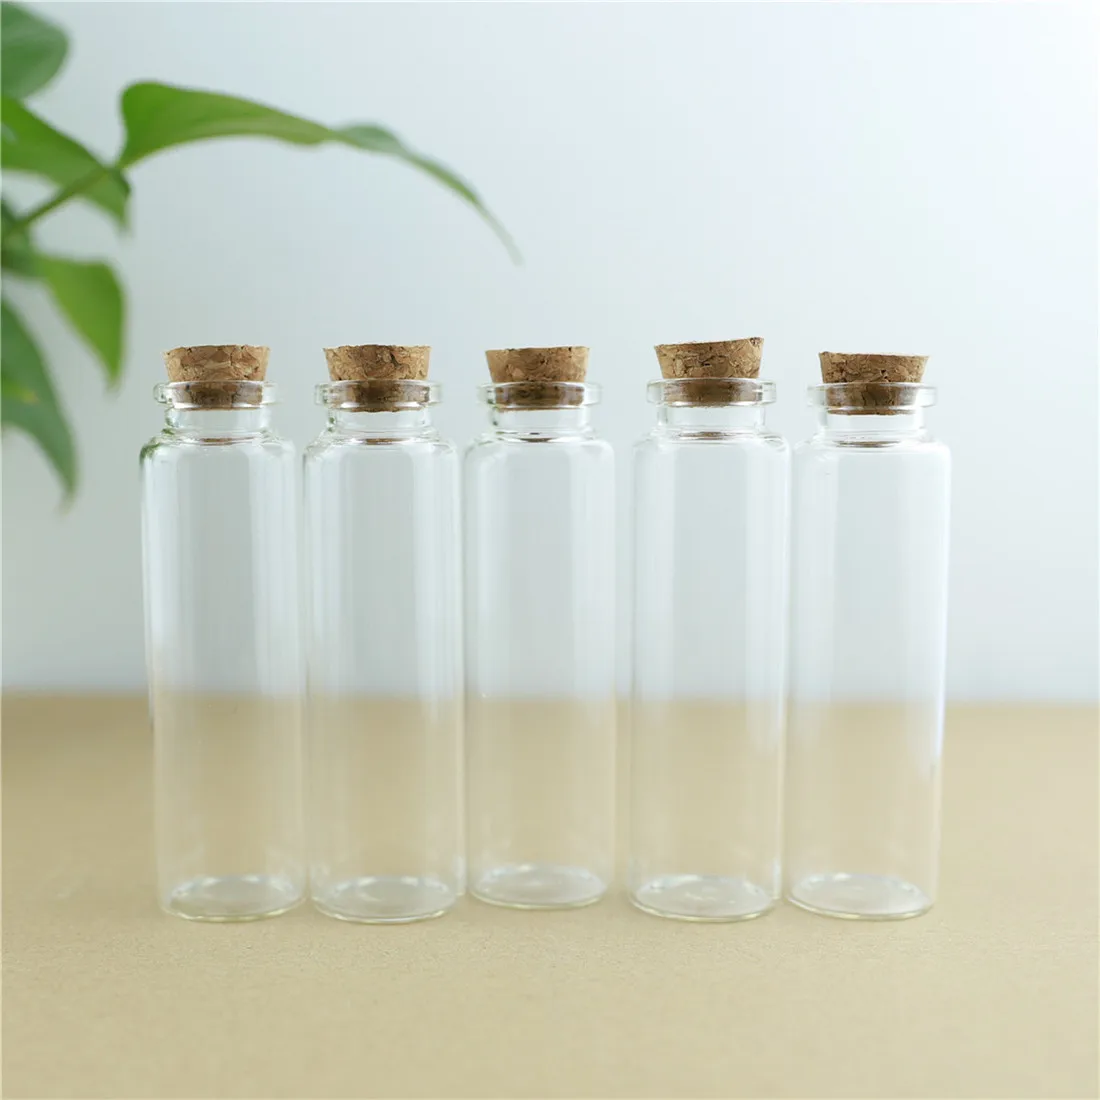 12 Pack 50ml Small Glass Bottles with Cork Stopper, Mini Jars With